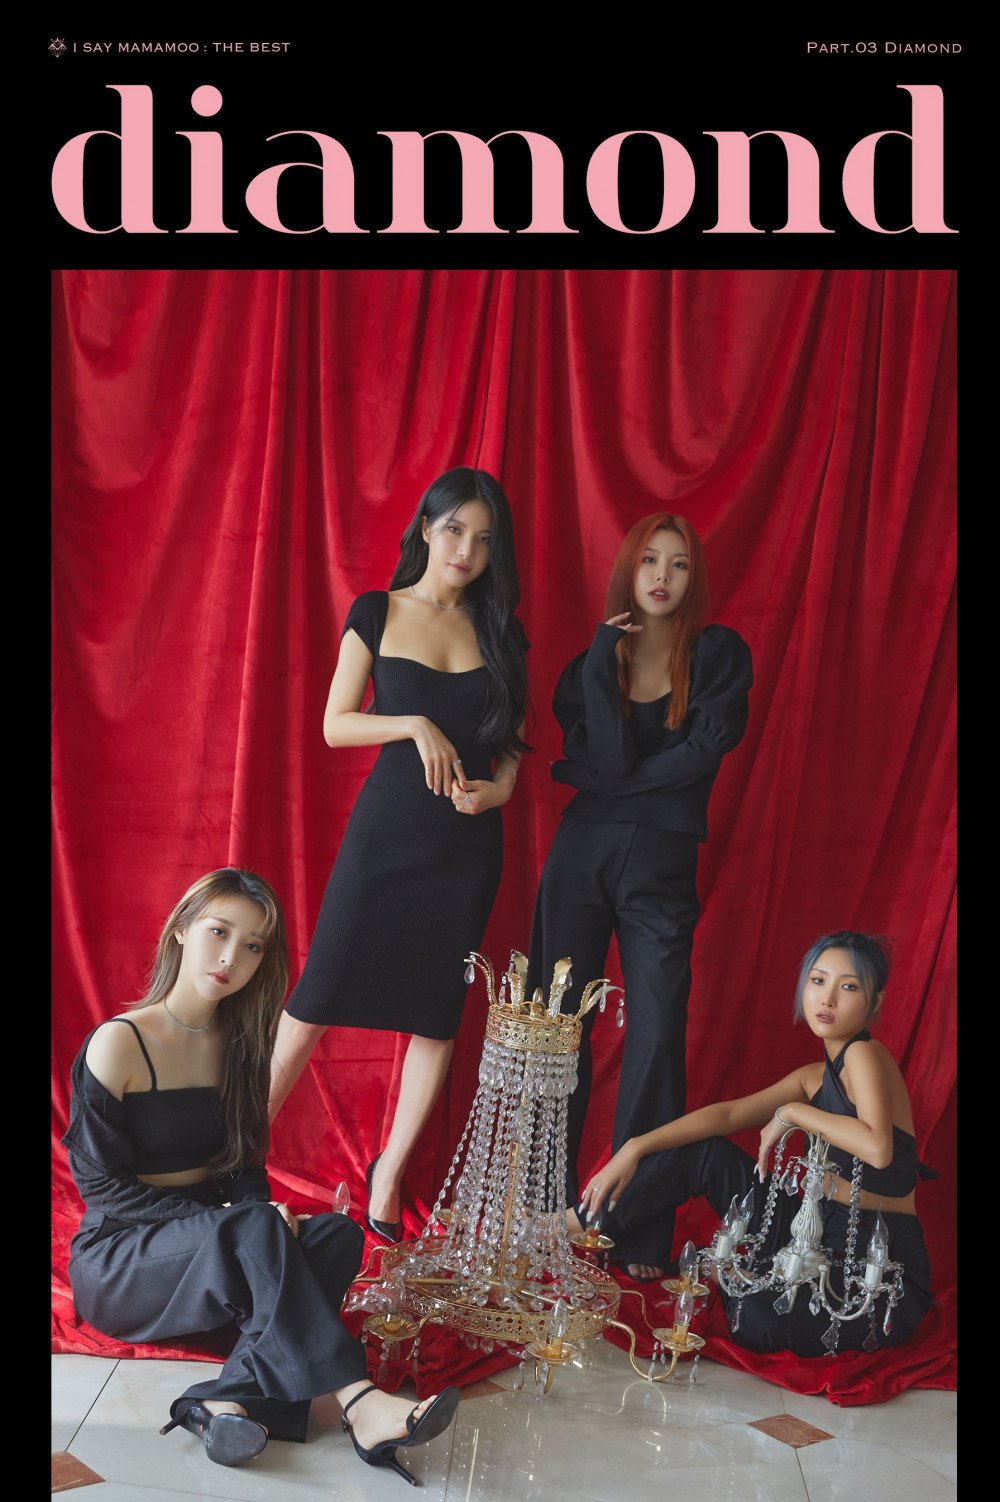 MAMAMOO's concept images for 'I SAY MAMAMOO: THE BEST'